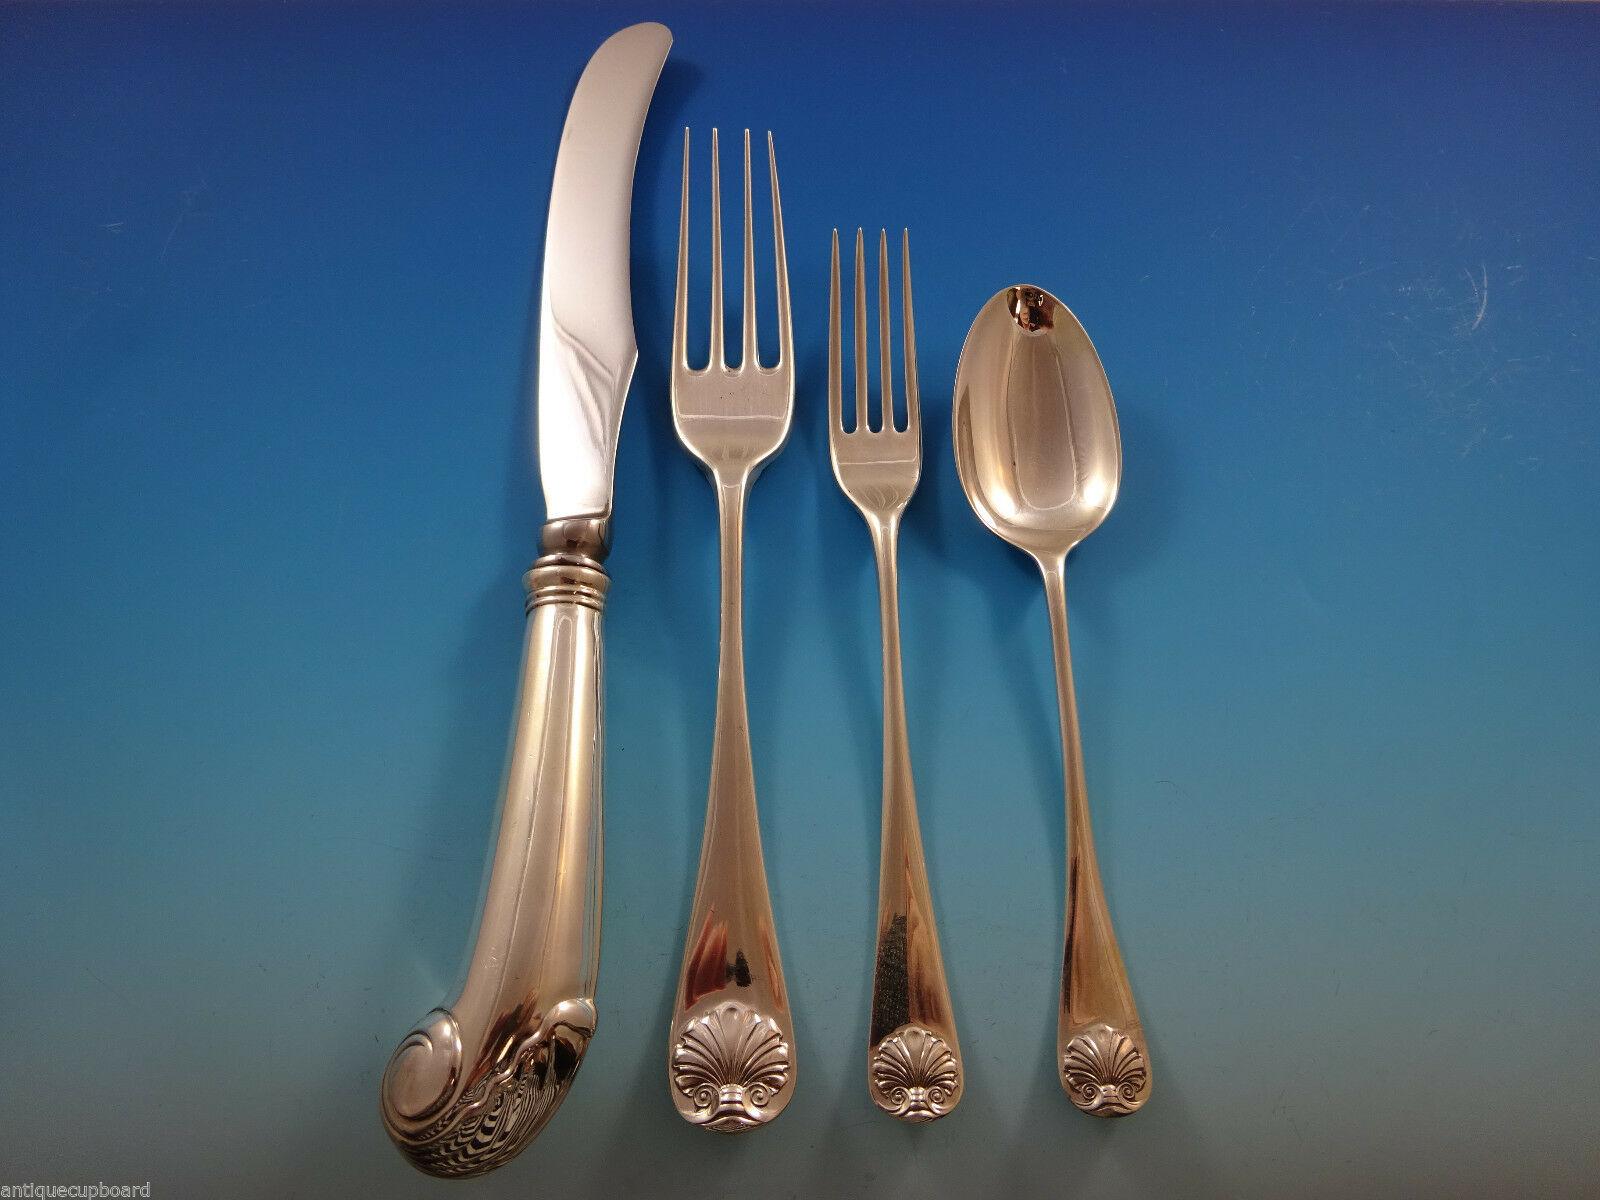 Large and heavy Williamsburg Shell by Stieff sterling silver dinner flatware set - 51 pieces. Wonderful Pistol-grip Handles! This set includes:

12 dinner knives, 9 3/4